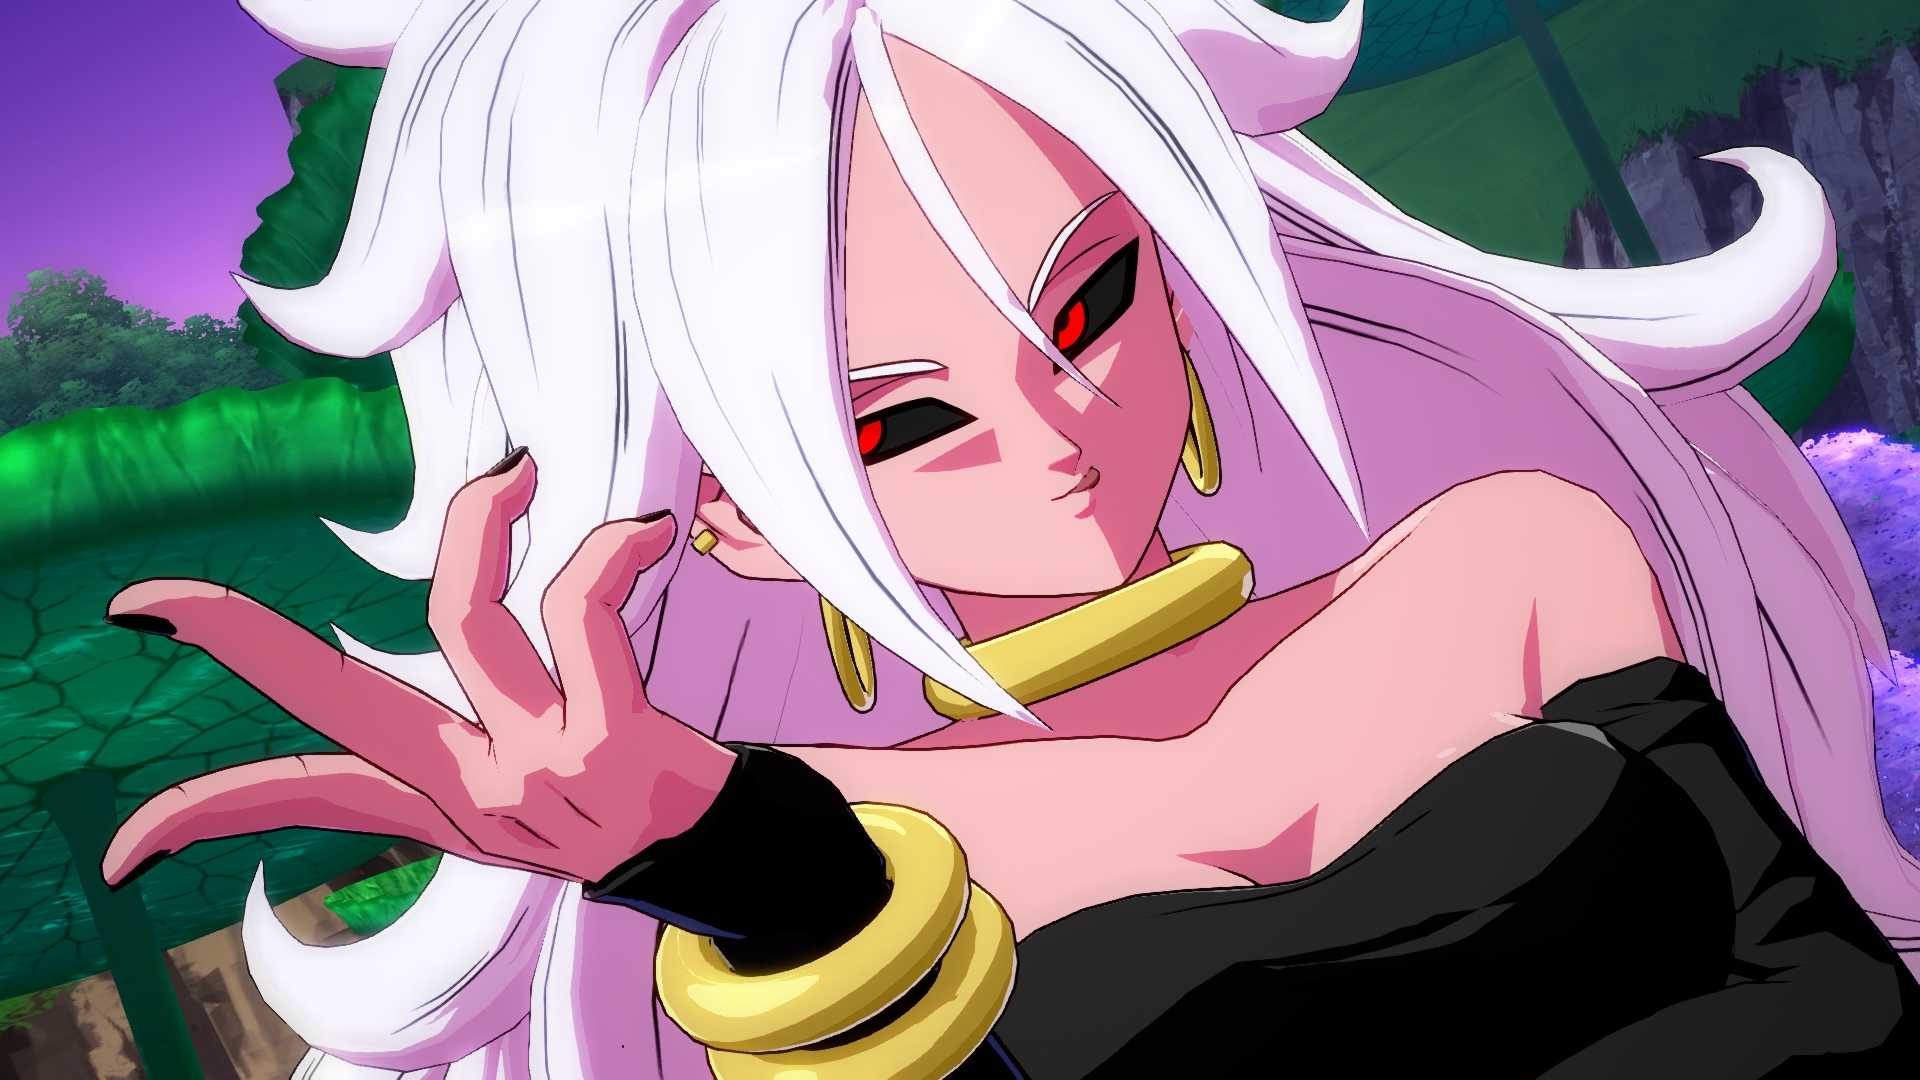 Android 21.jpg